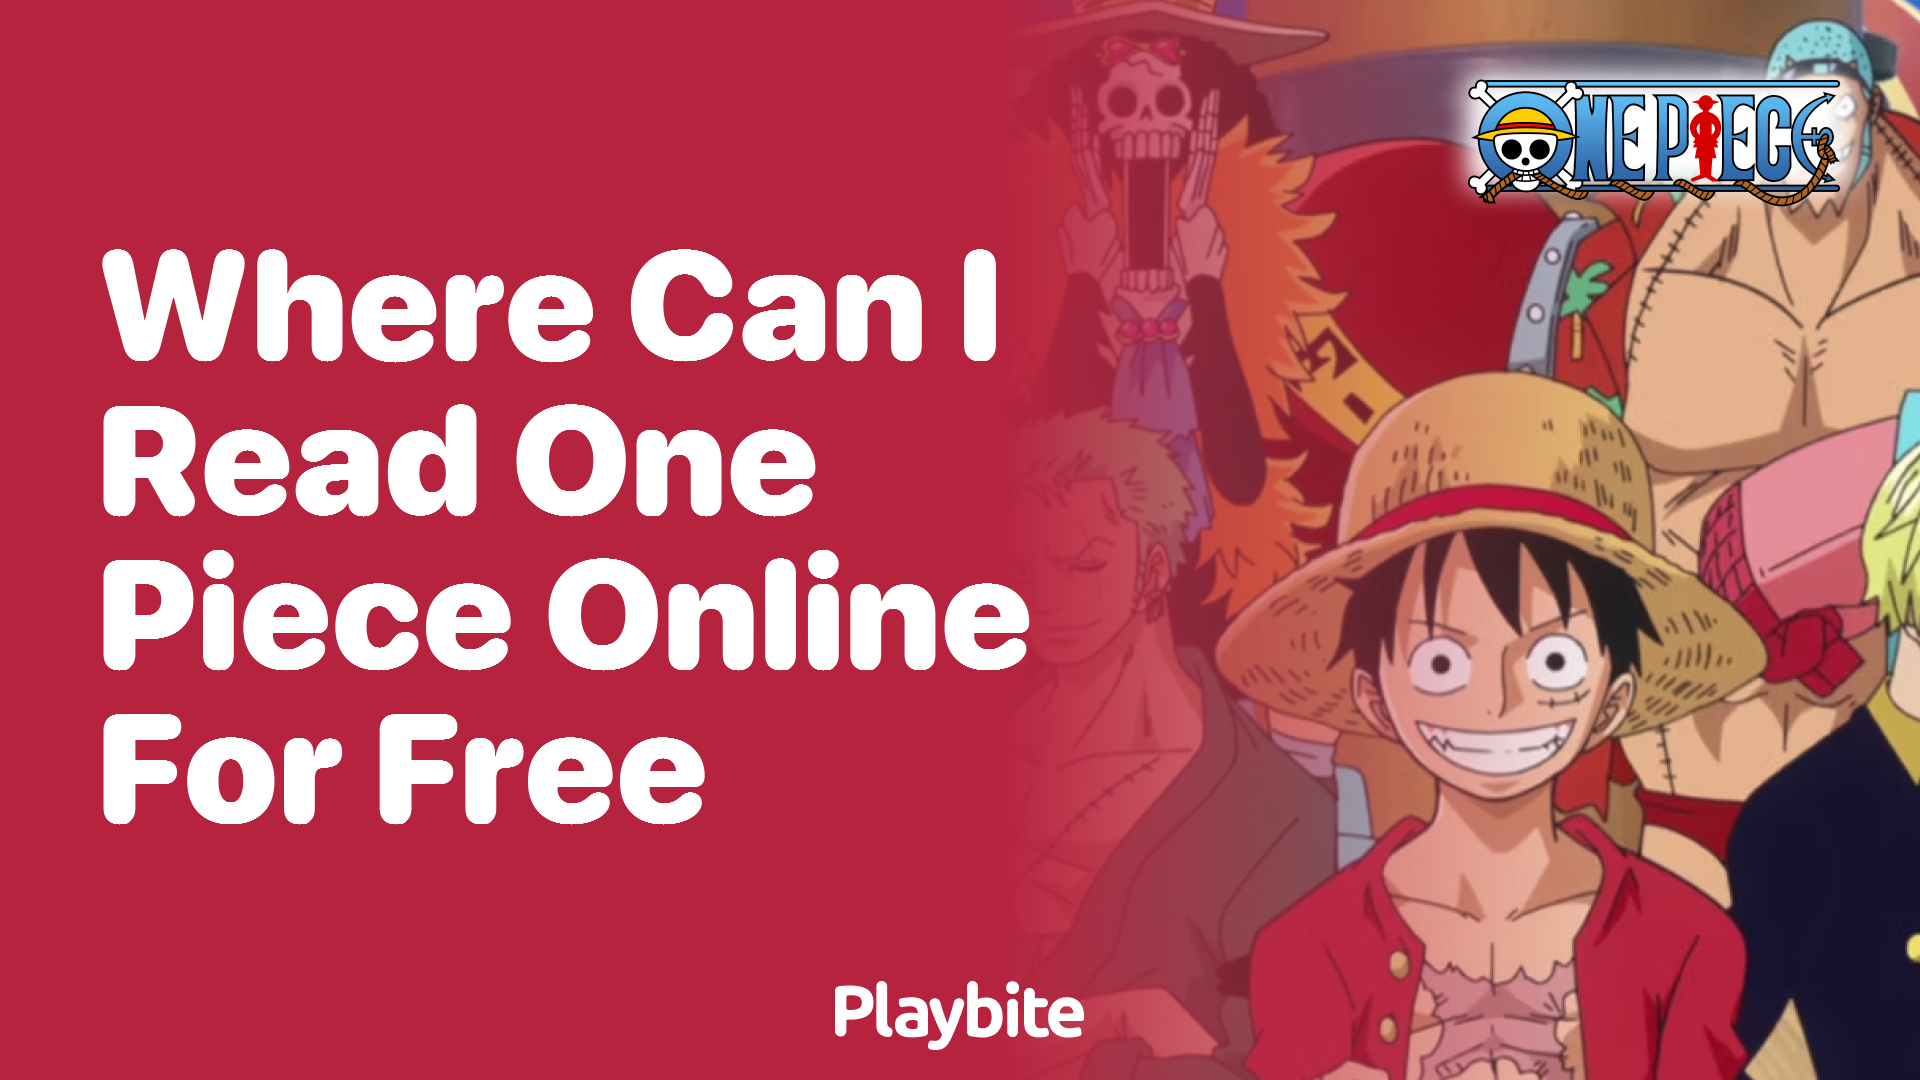 Where Can I Read One Piece Online for Free?